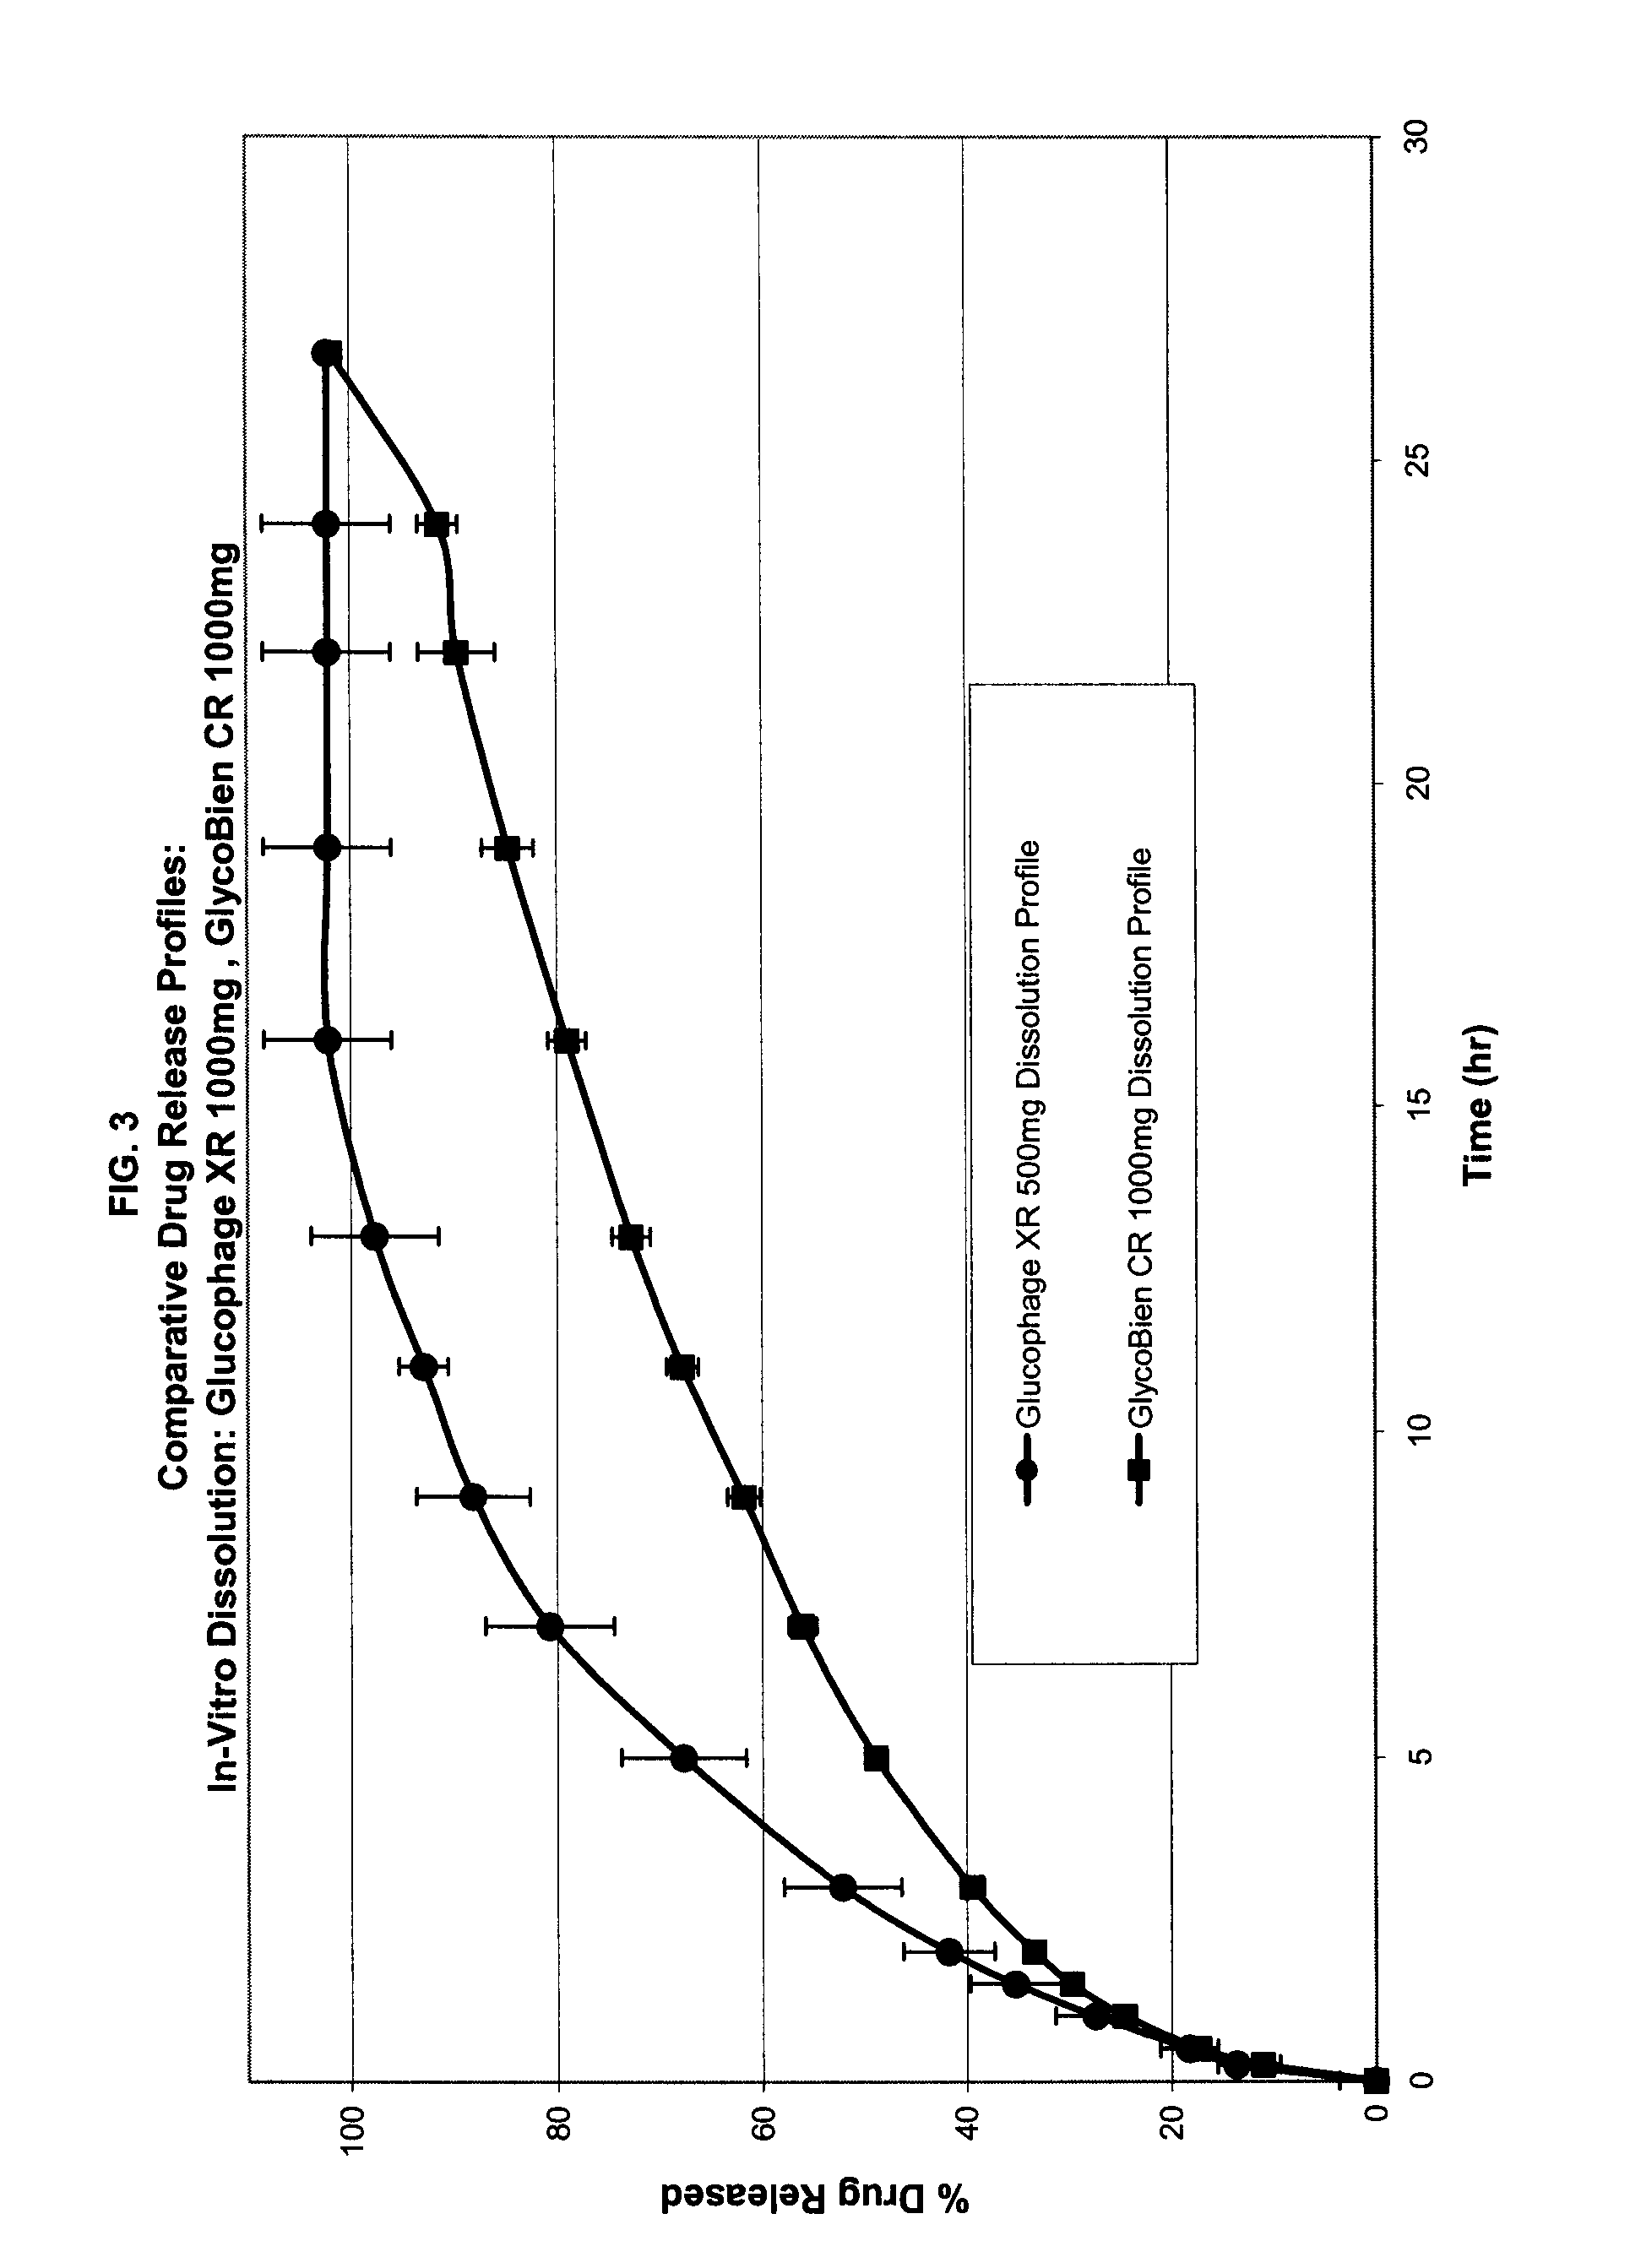 Method of treating dysglycemia and glucose excursions